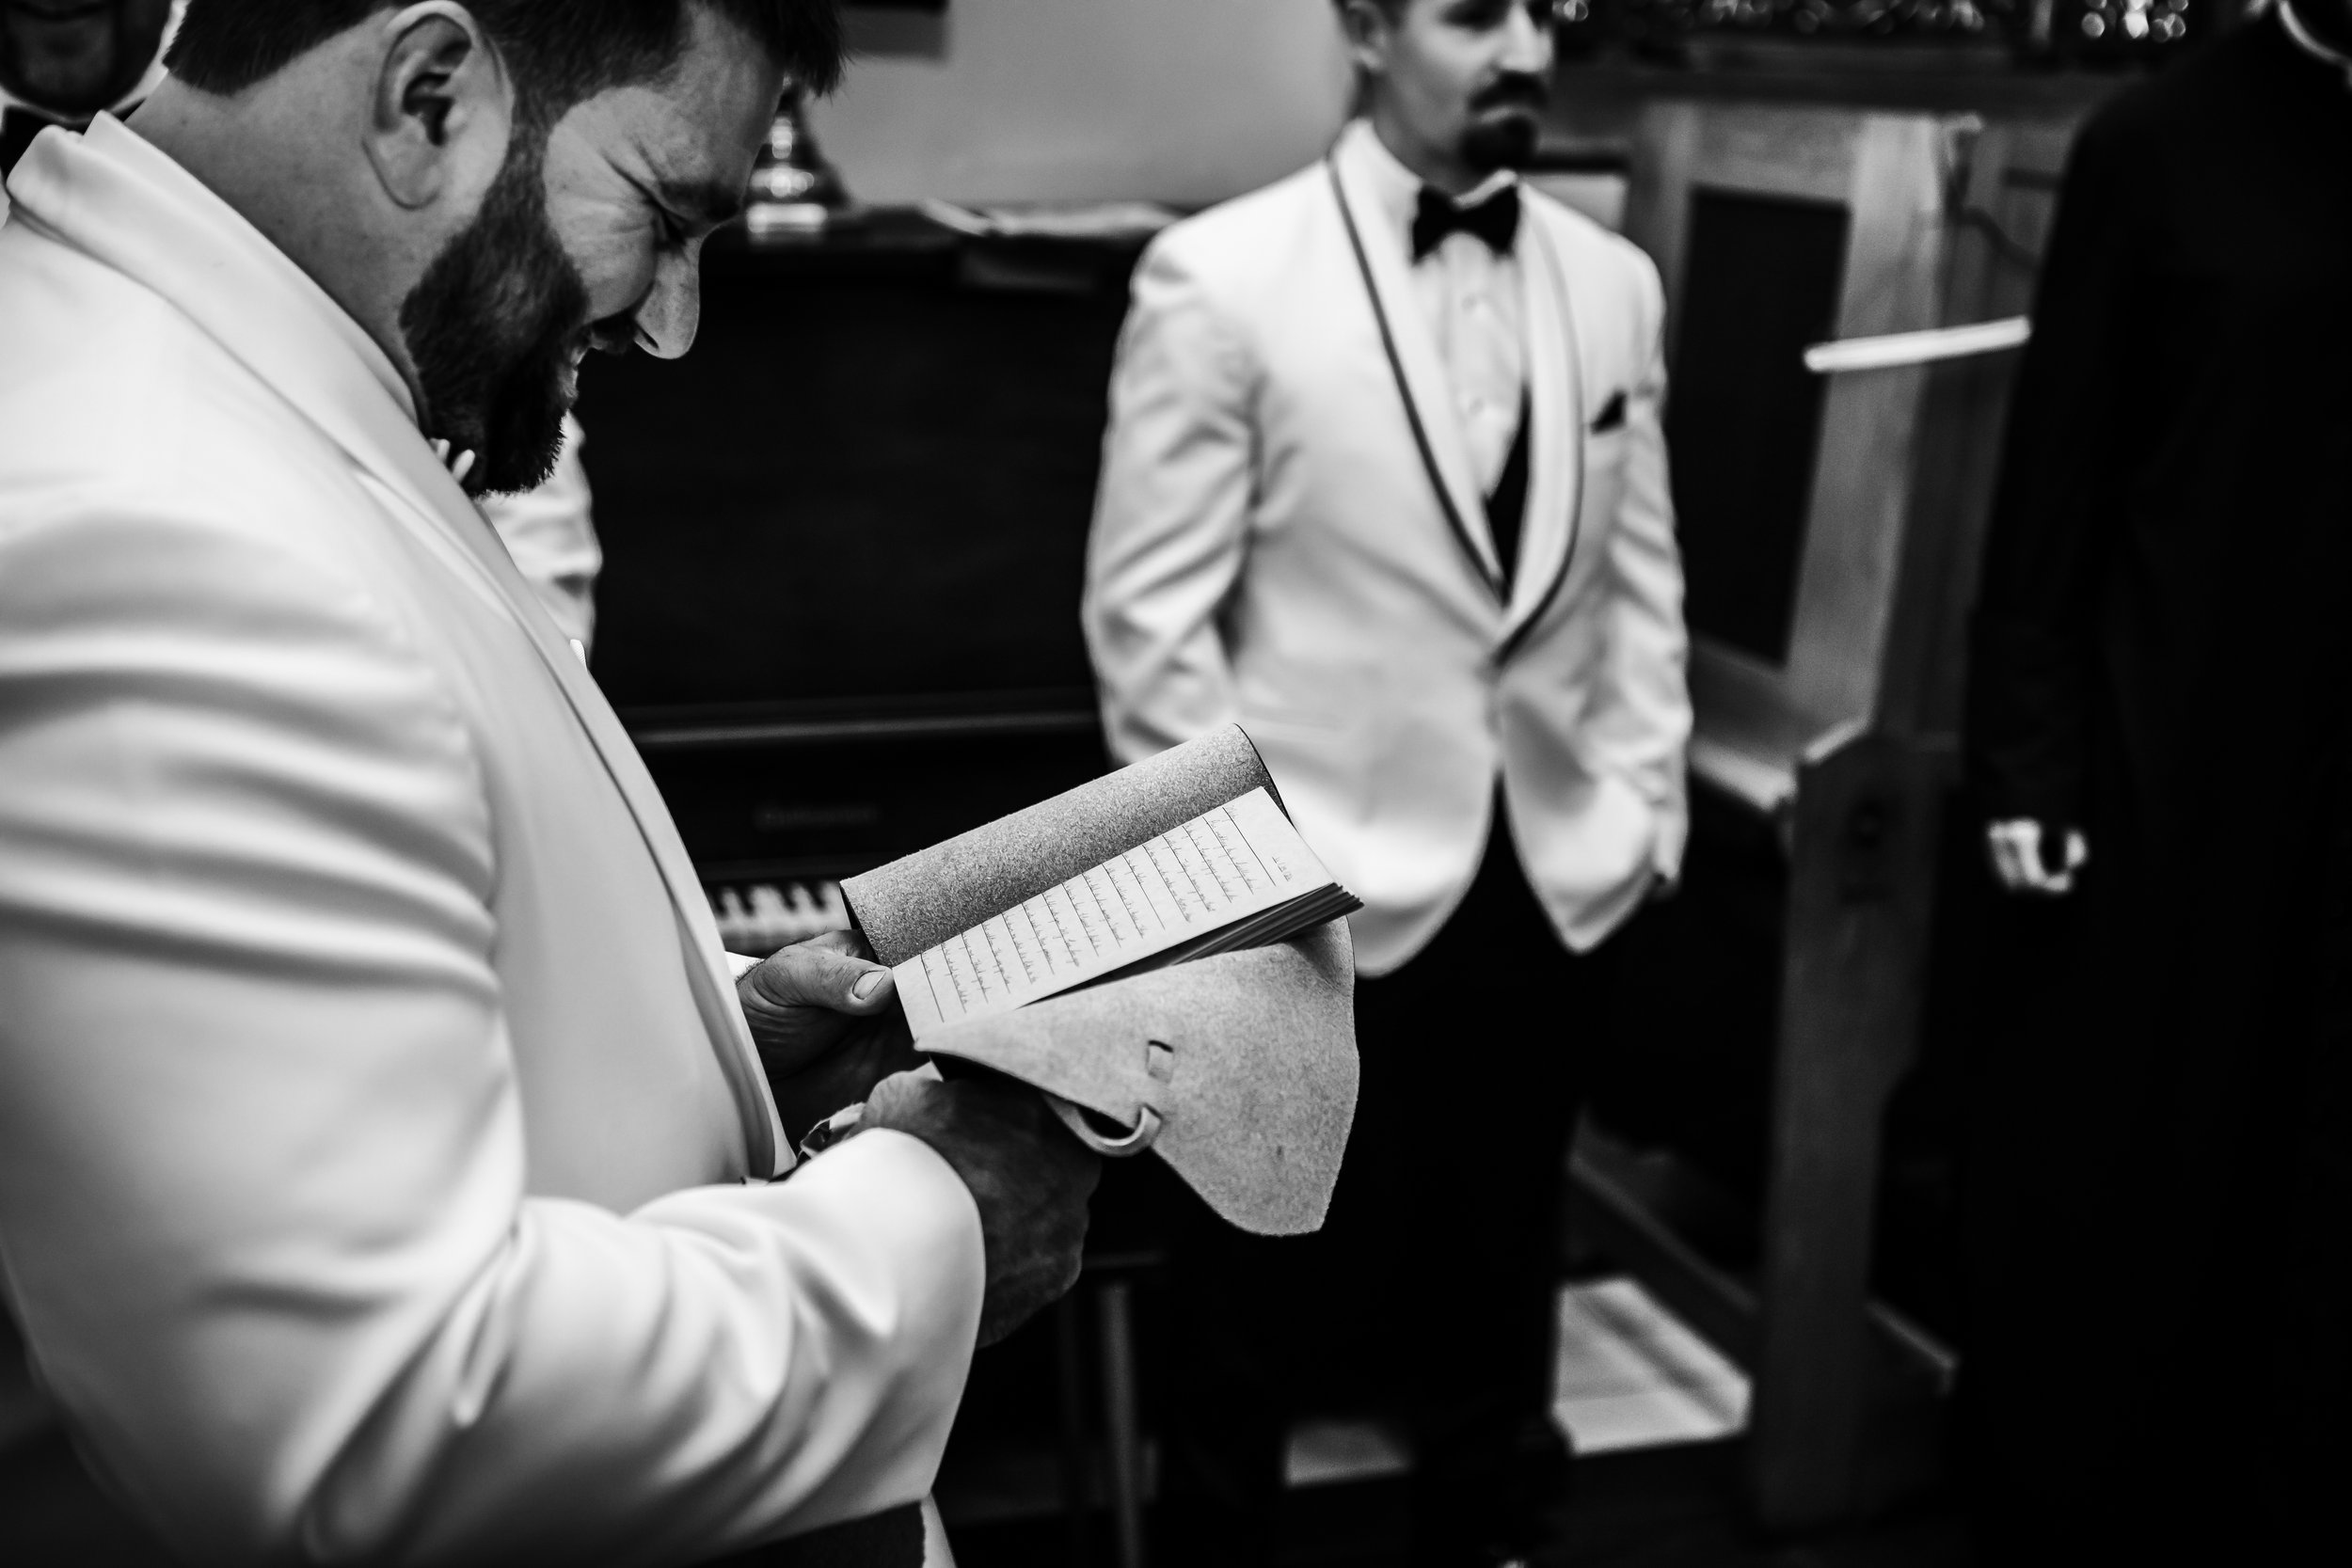  Teala Ward Photography captures a groom reading his vows on his wedding day in a historic building in LaSalle. groom candids #TealaWardPhotography #TealaWardWeddings #LaSalleWedding #churchwedding #Illinoisweddingphotographer #LaSalle,IL 